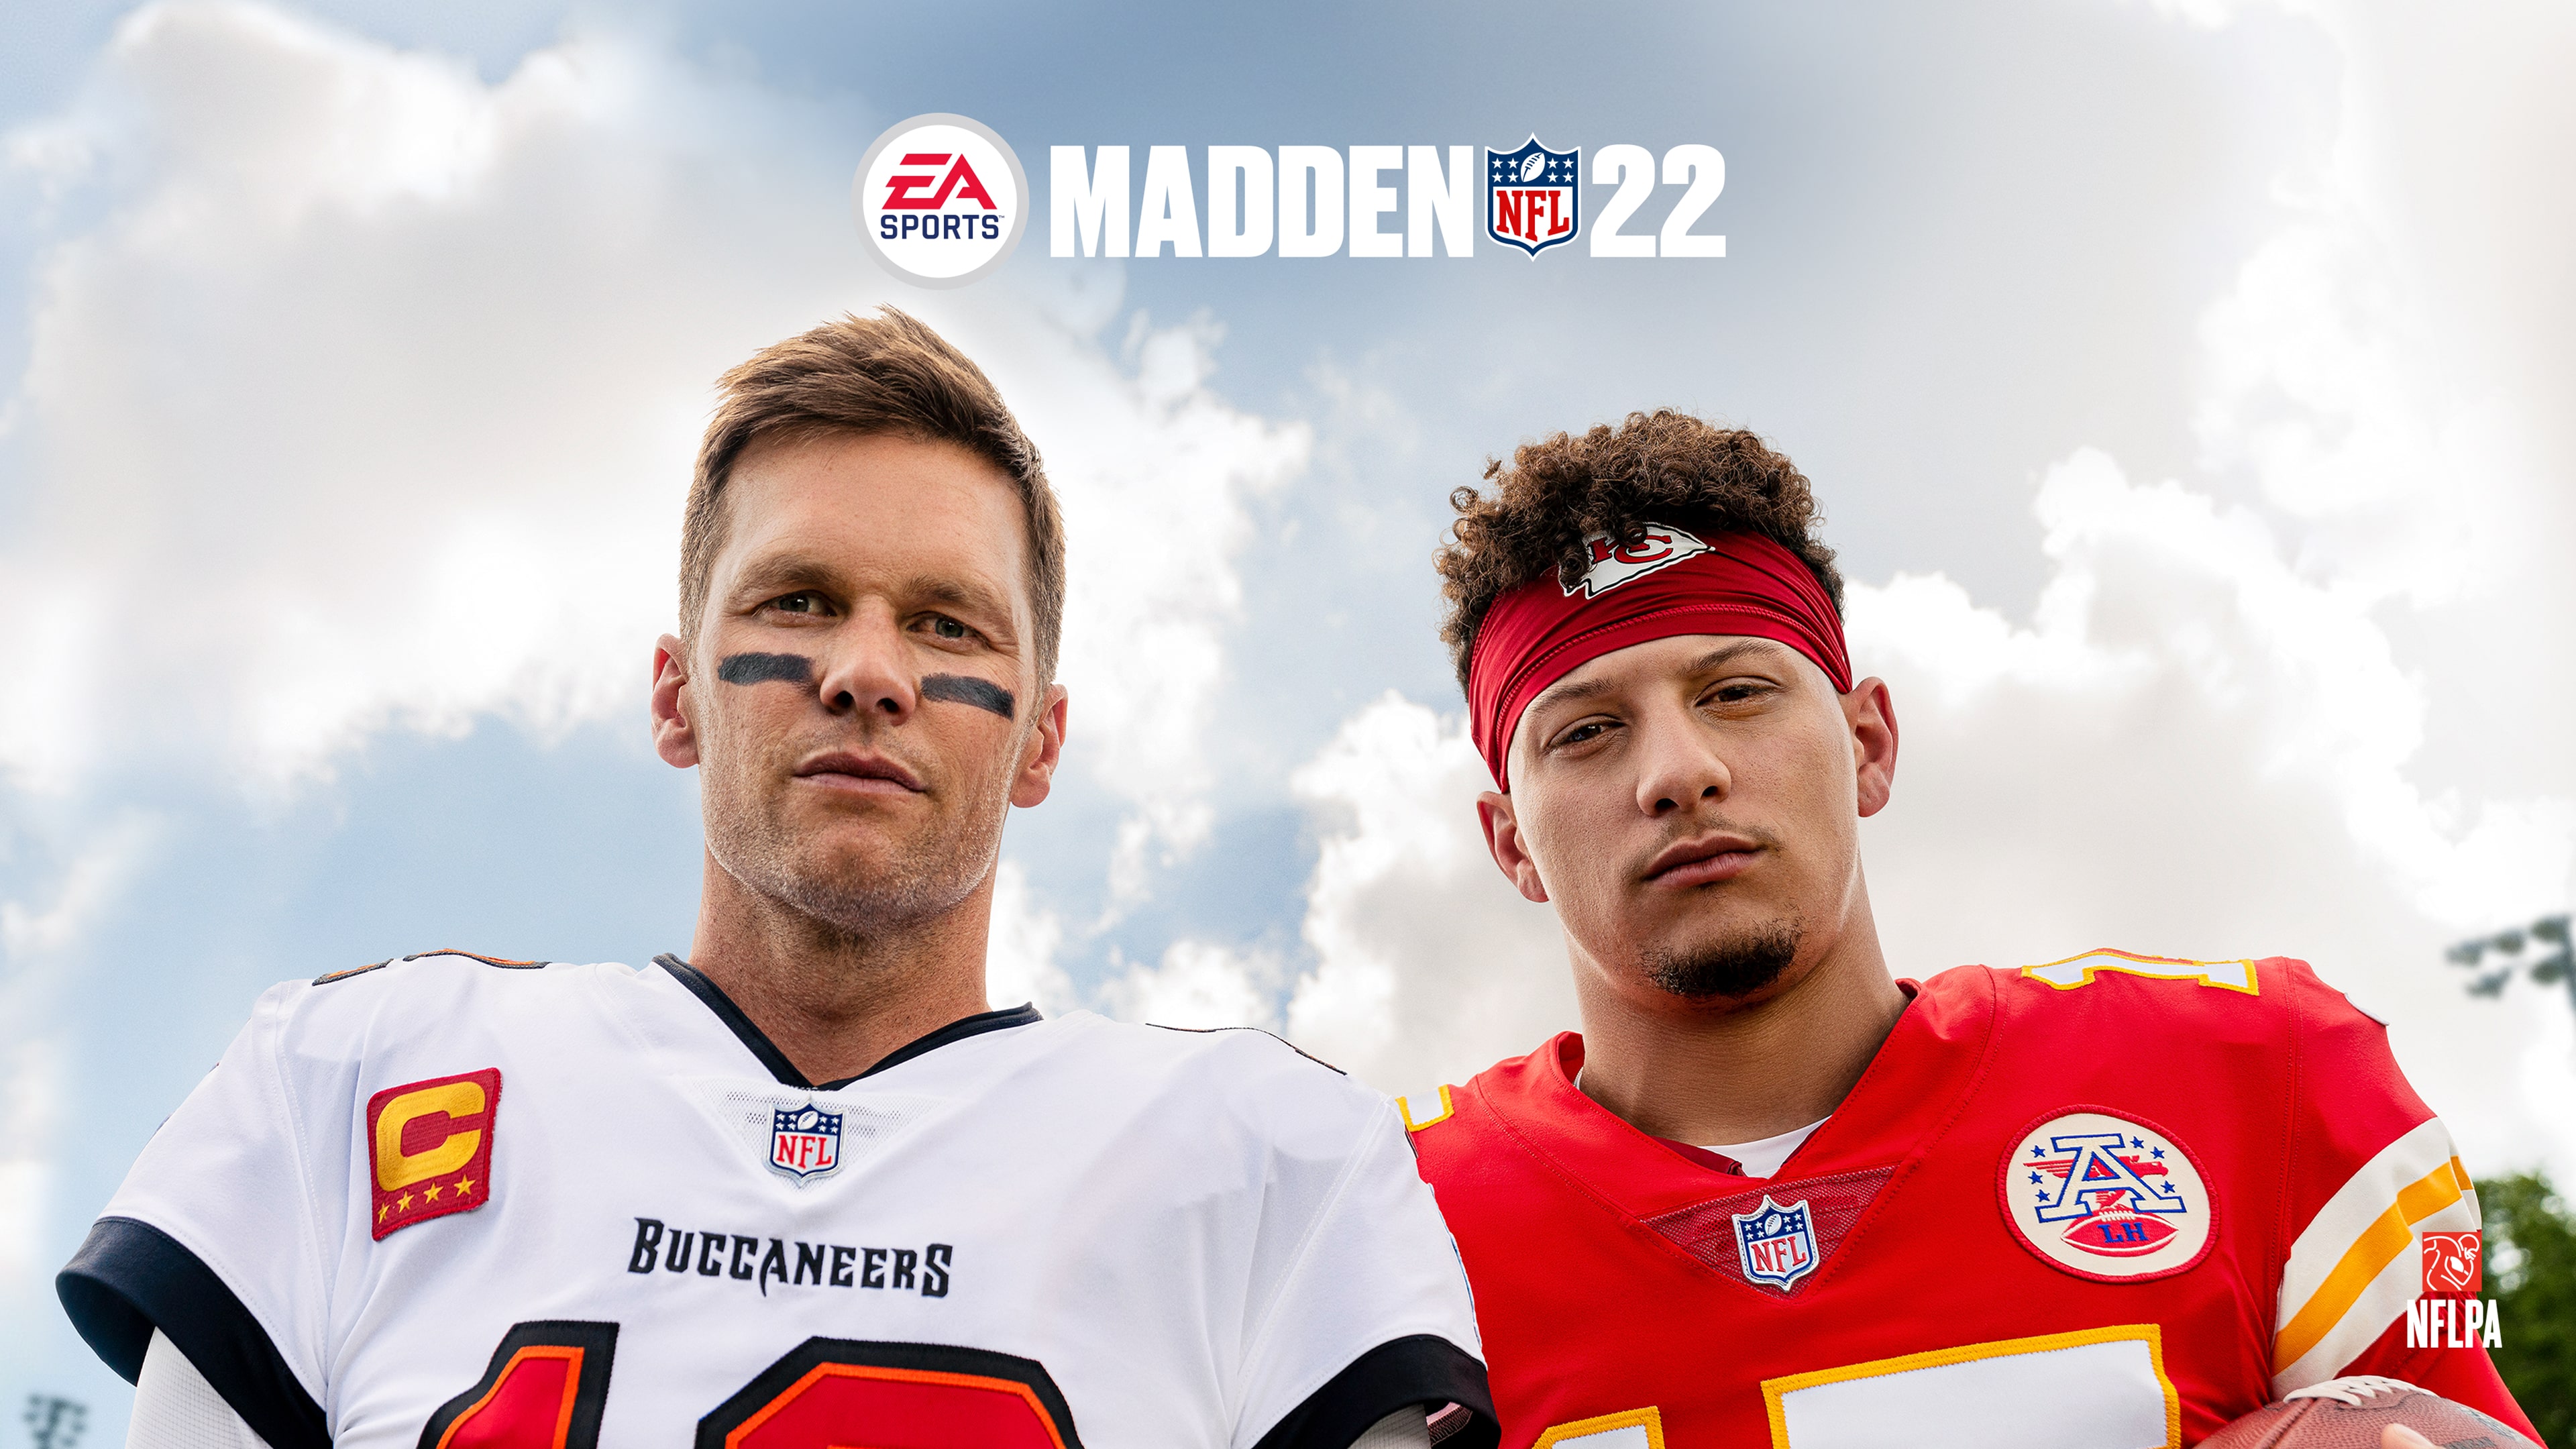 madden 22 ps5 on sale